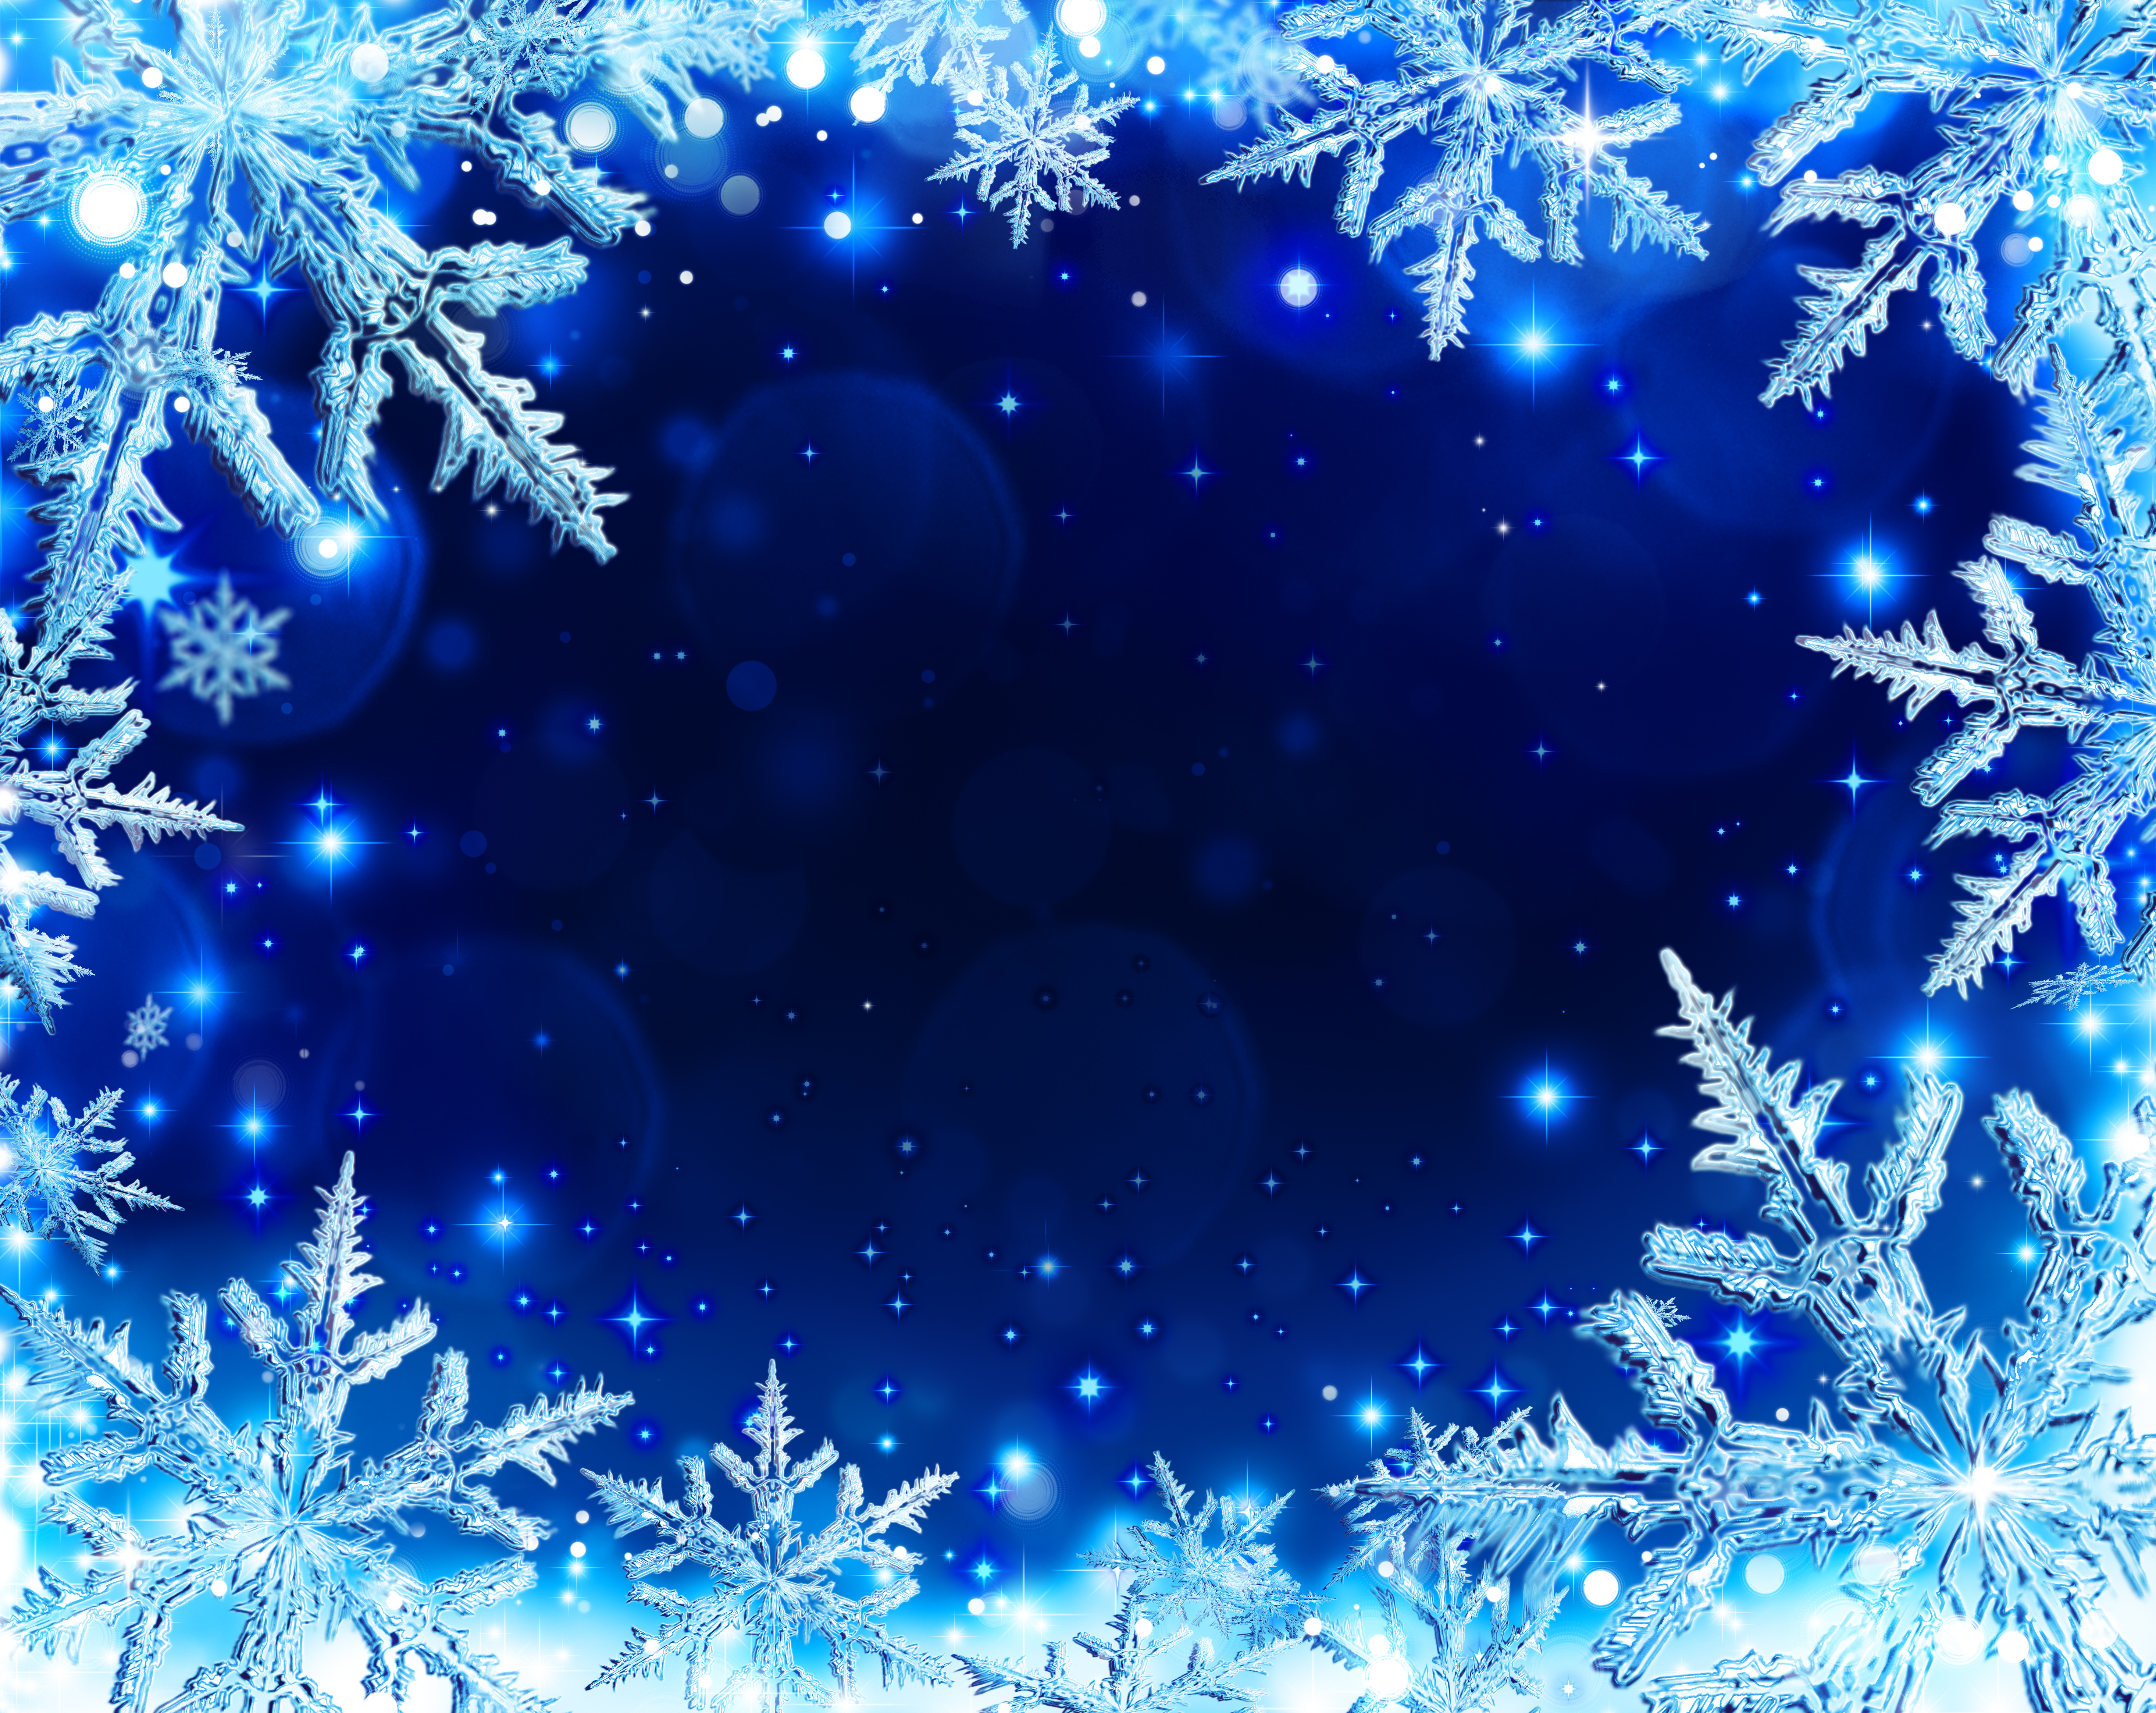 Winter Snowflakes Aesthetic Background Wallpaper Image For Free Download -  Pngtree